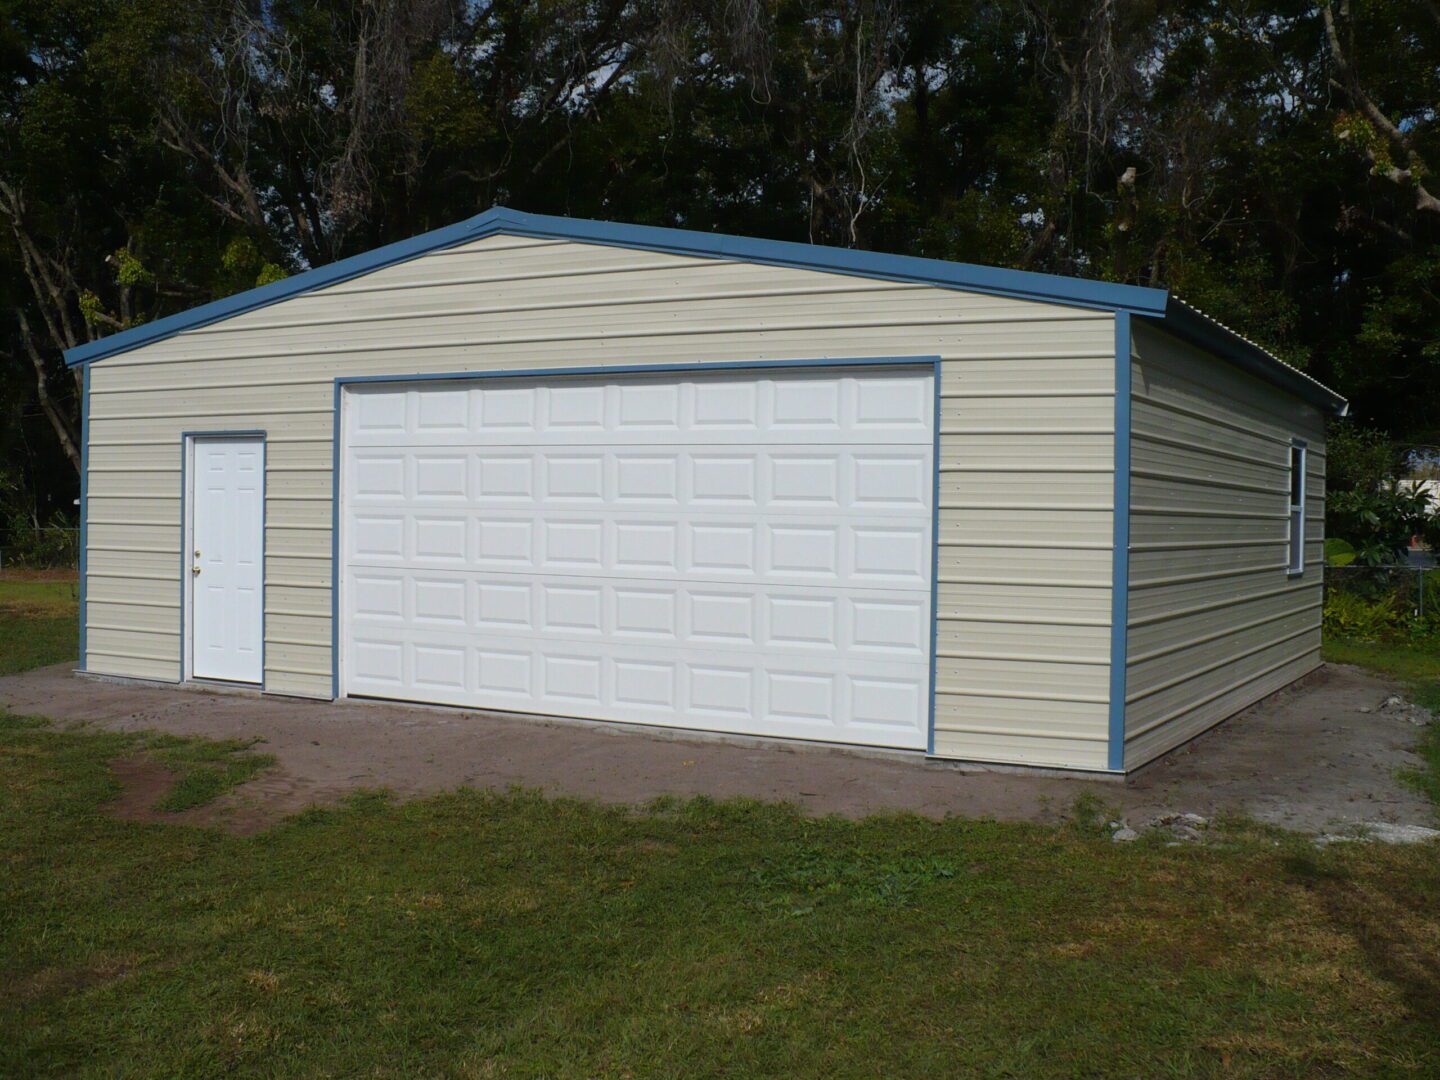 A large garage with two doors and a blue trim.